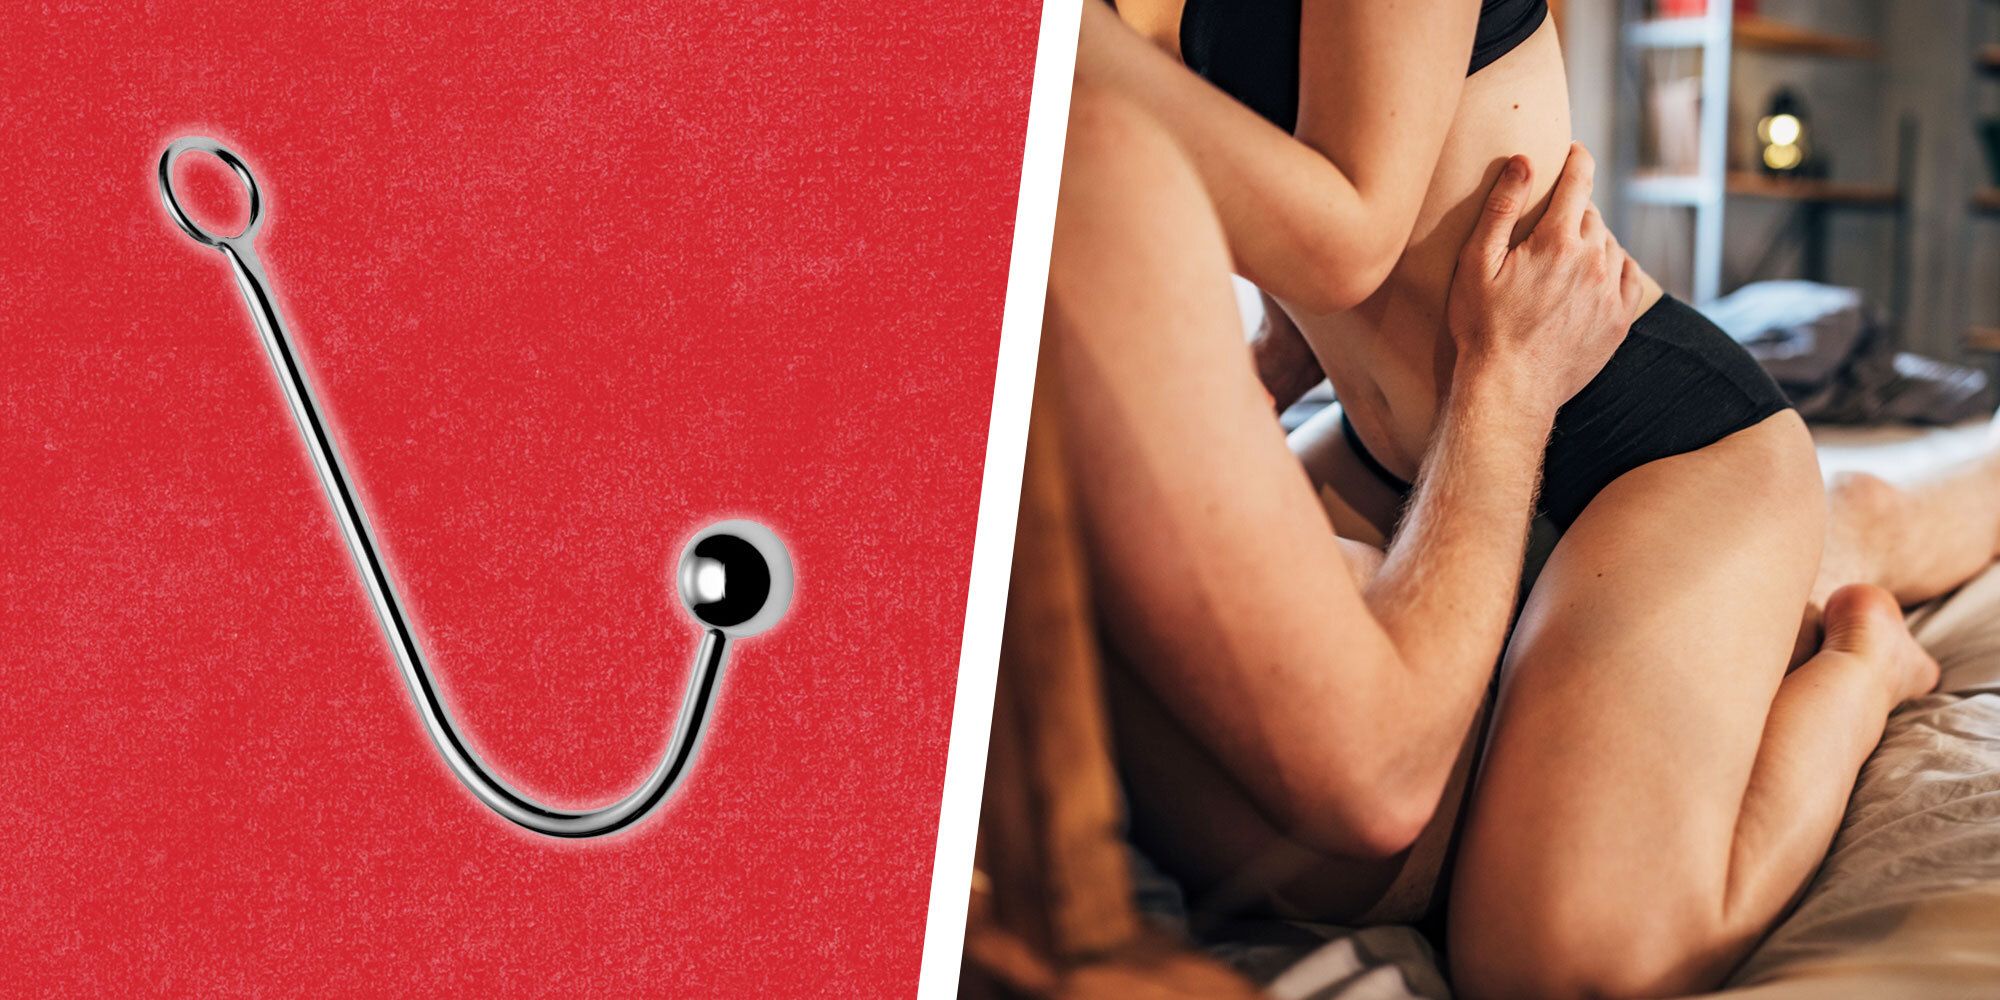 Anal Hooks What They Are and How to Use Them, According to Experts